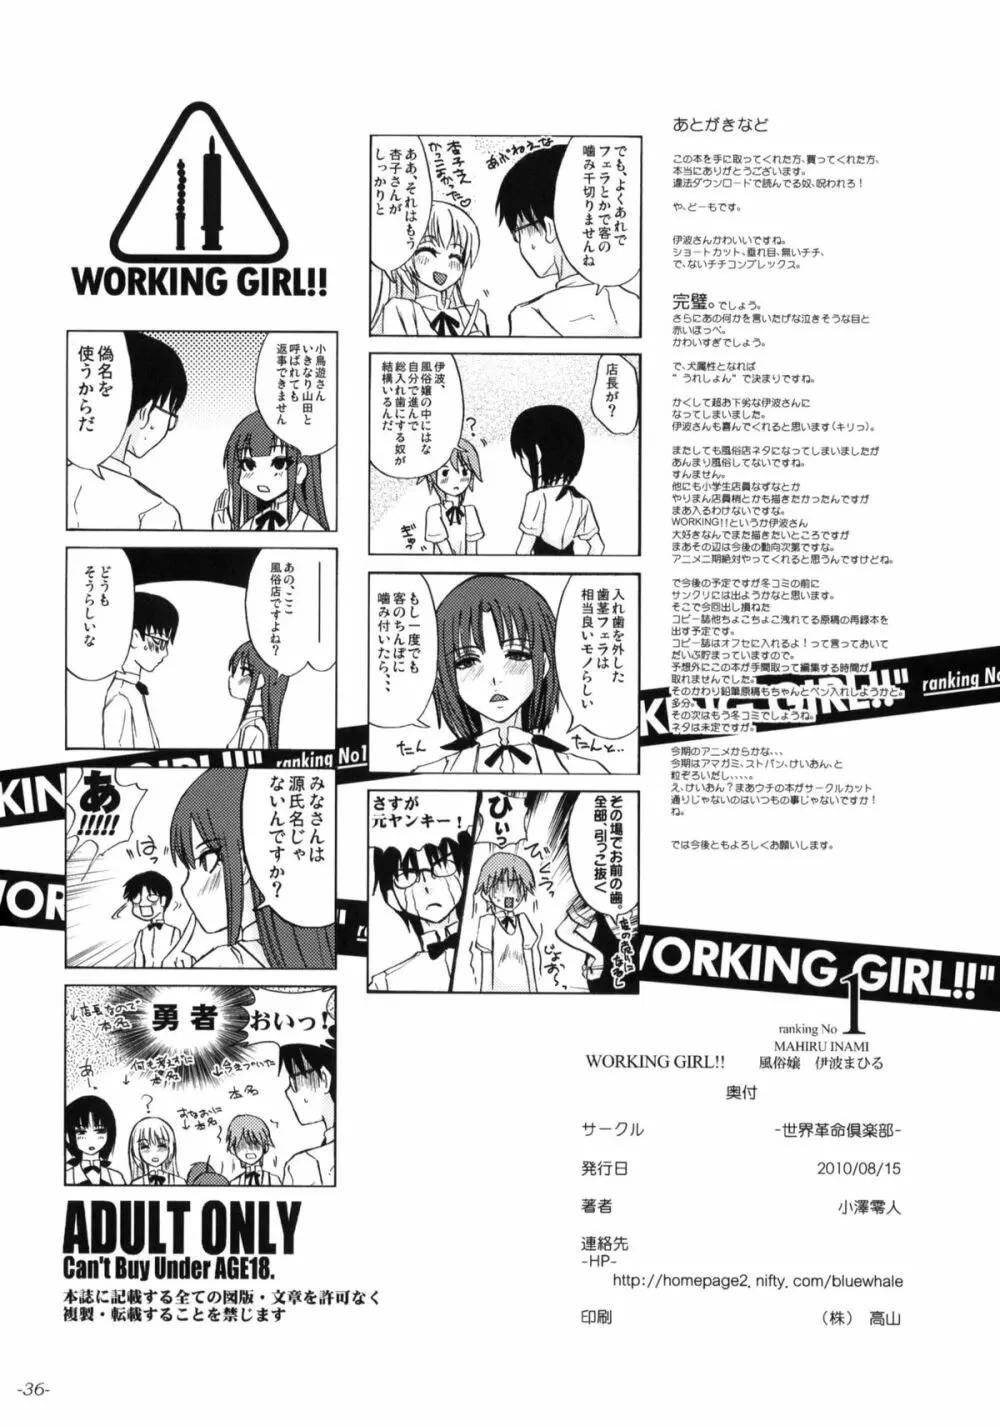 WORKING GIRL!! ranking No 1 風俗嬢 伊波まひる Page.37